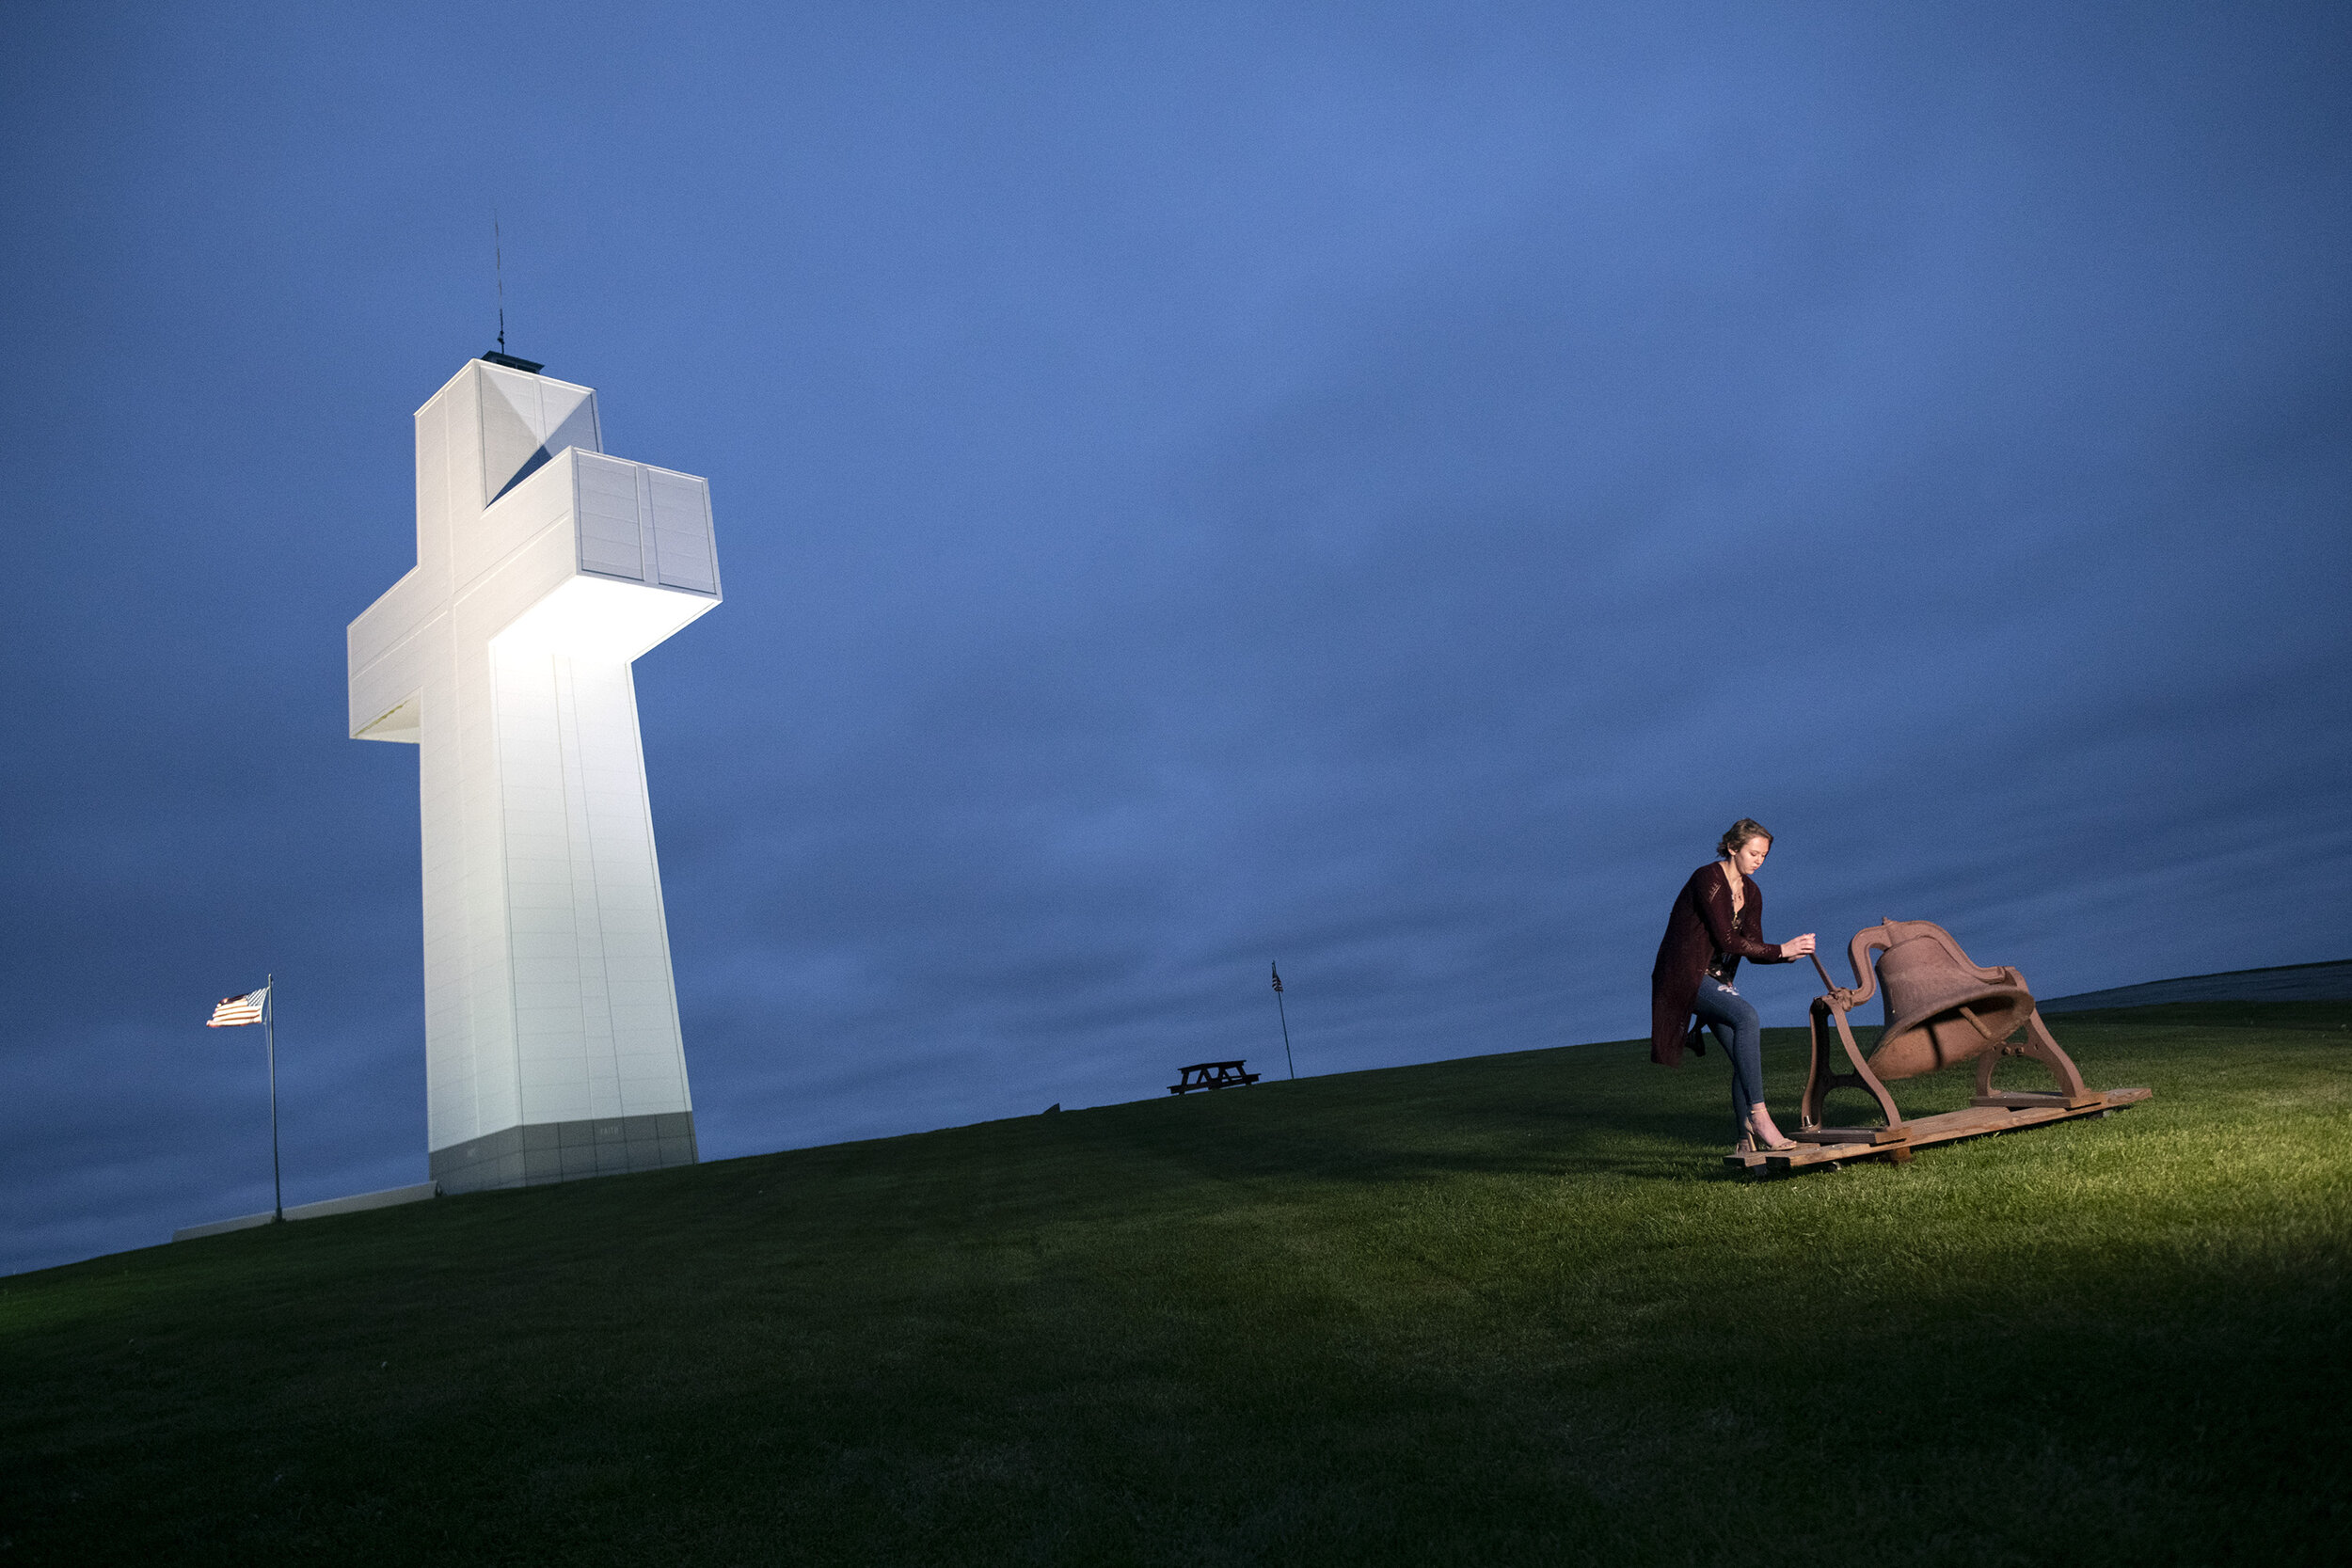  Worshipers flock to Bald Knob Cross of Peace most years for the annual Easter sunrise service, but not during the COVID-19 pandemic. However, there were a few people at the cross, located in Alto Pass, Illinois, to conduct the service and share it w